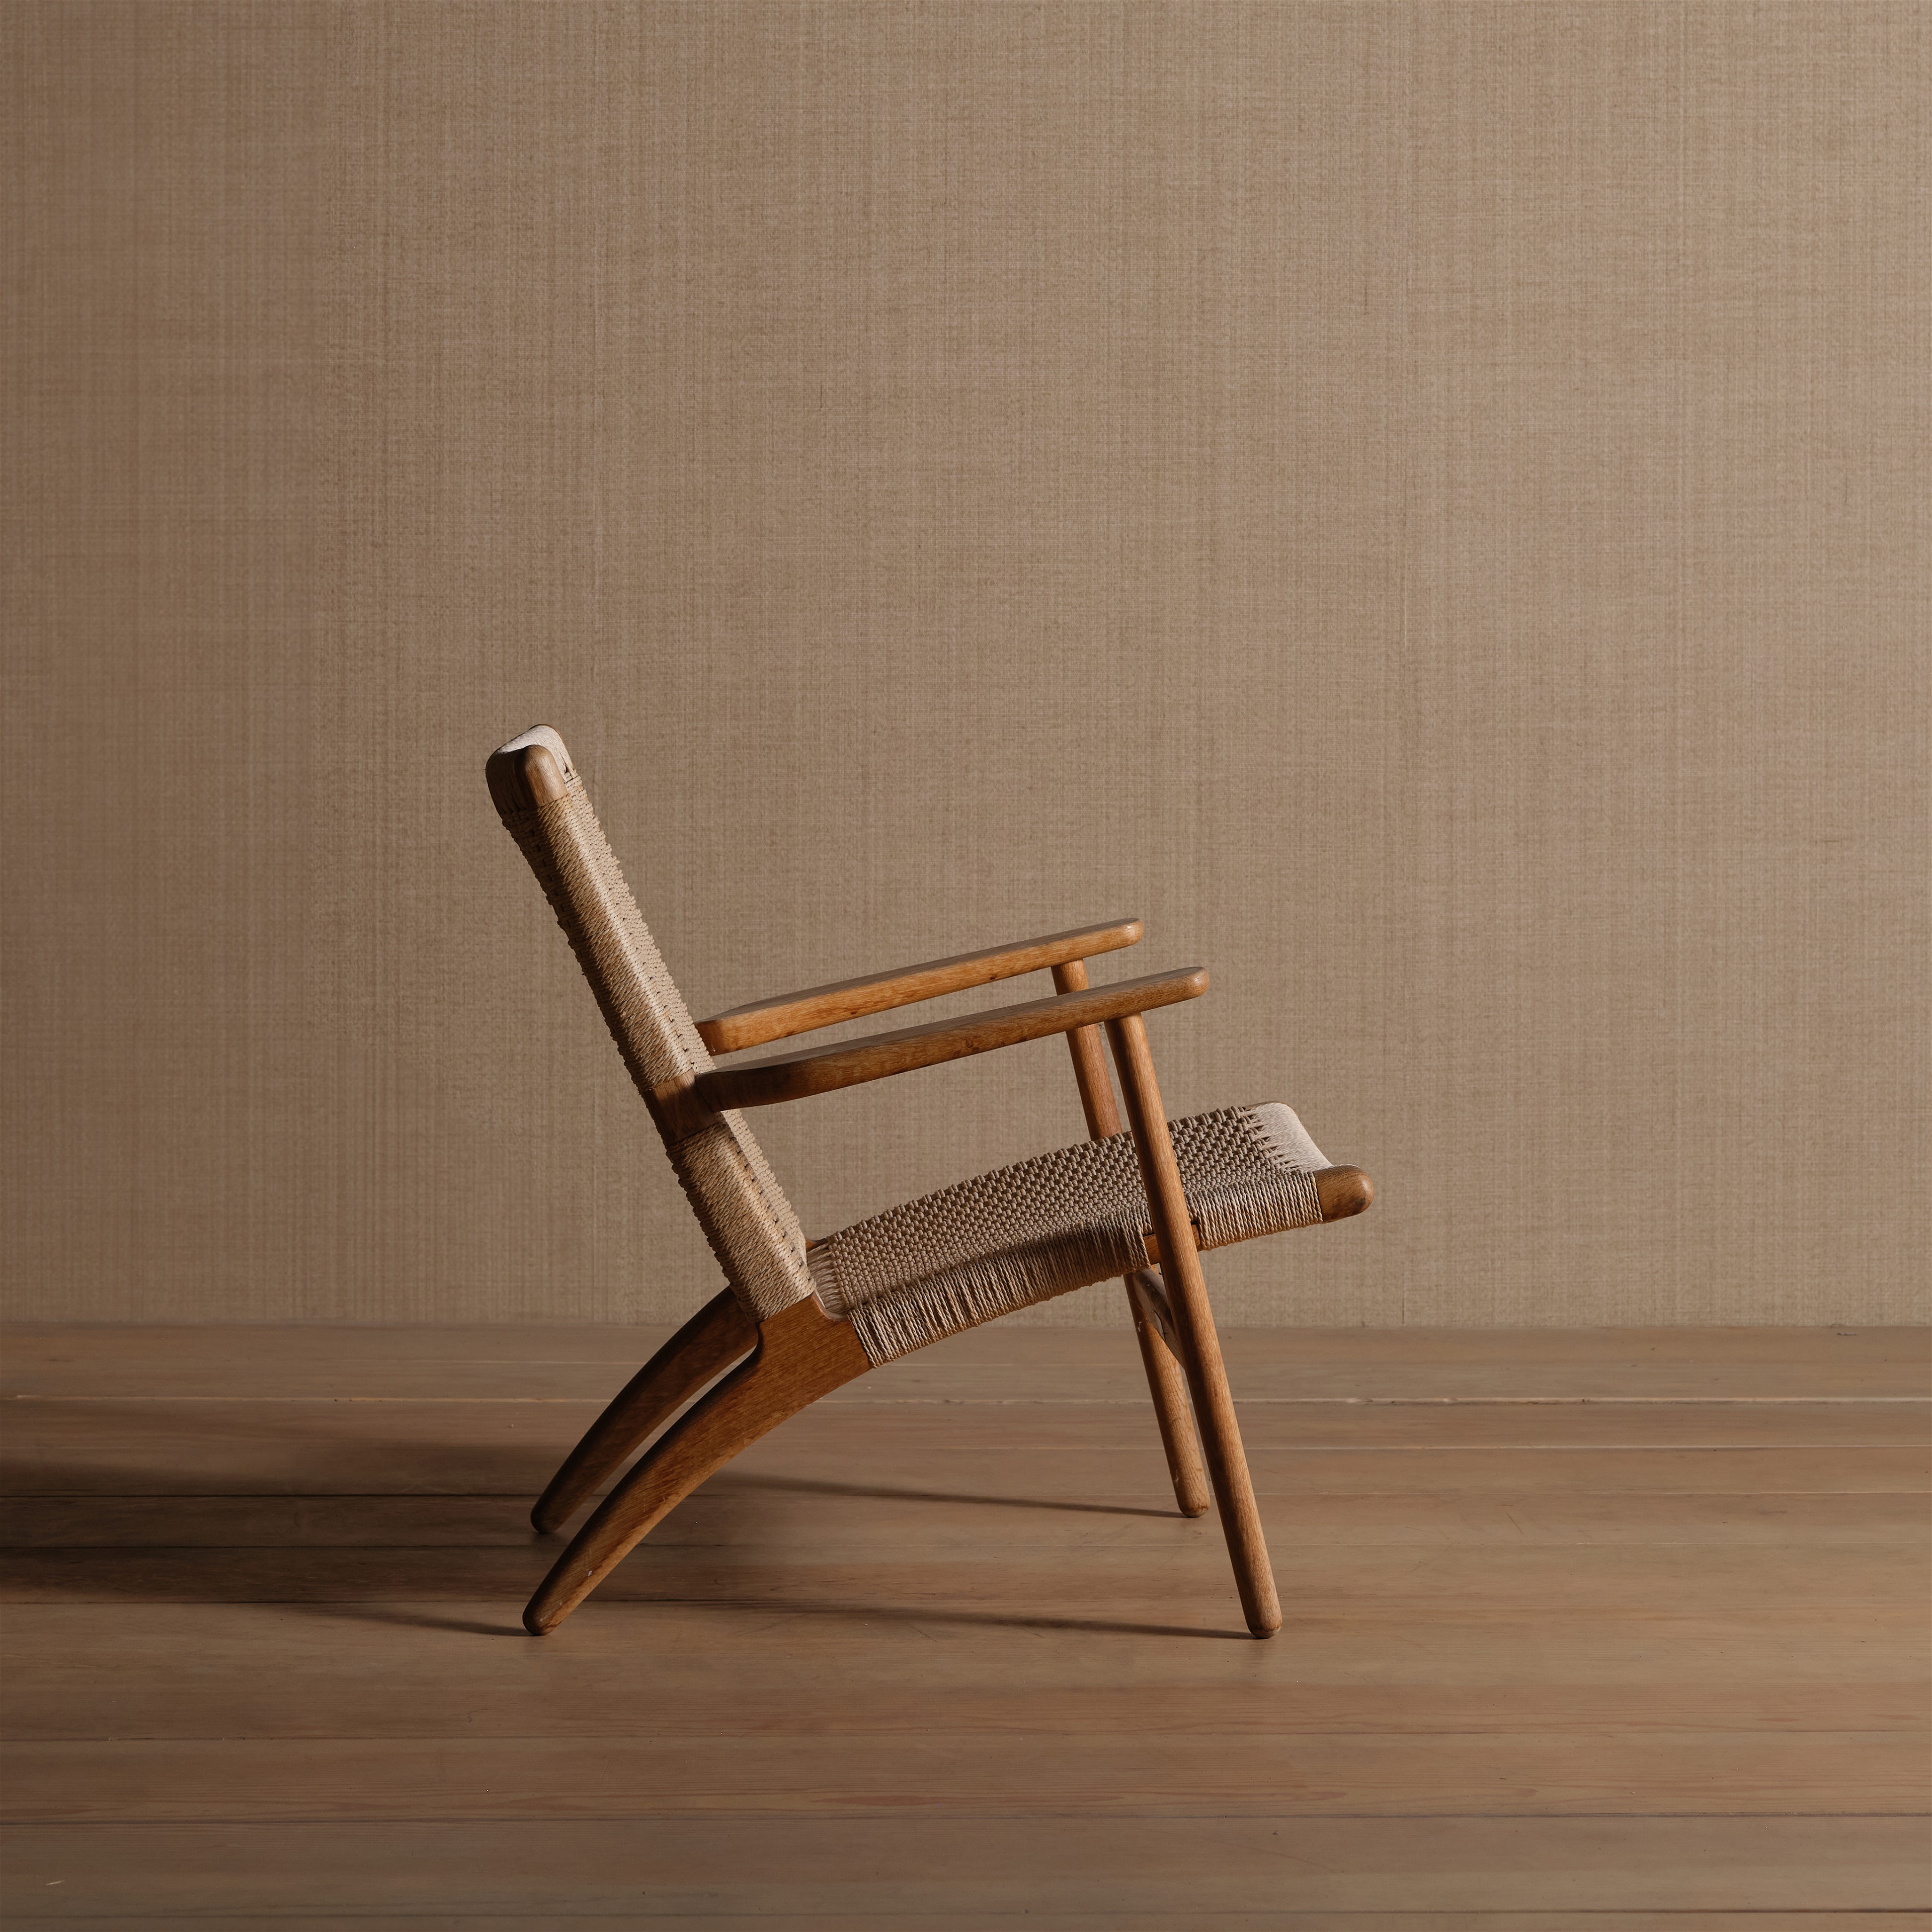 a wooden chair sitting on top of a wooden floor